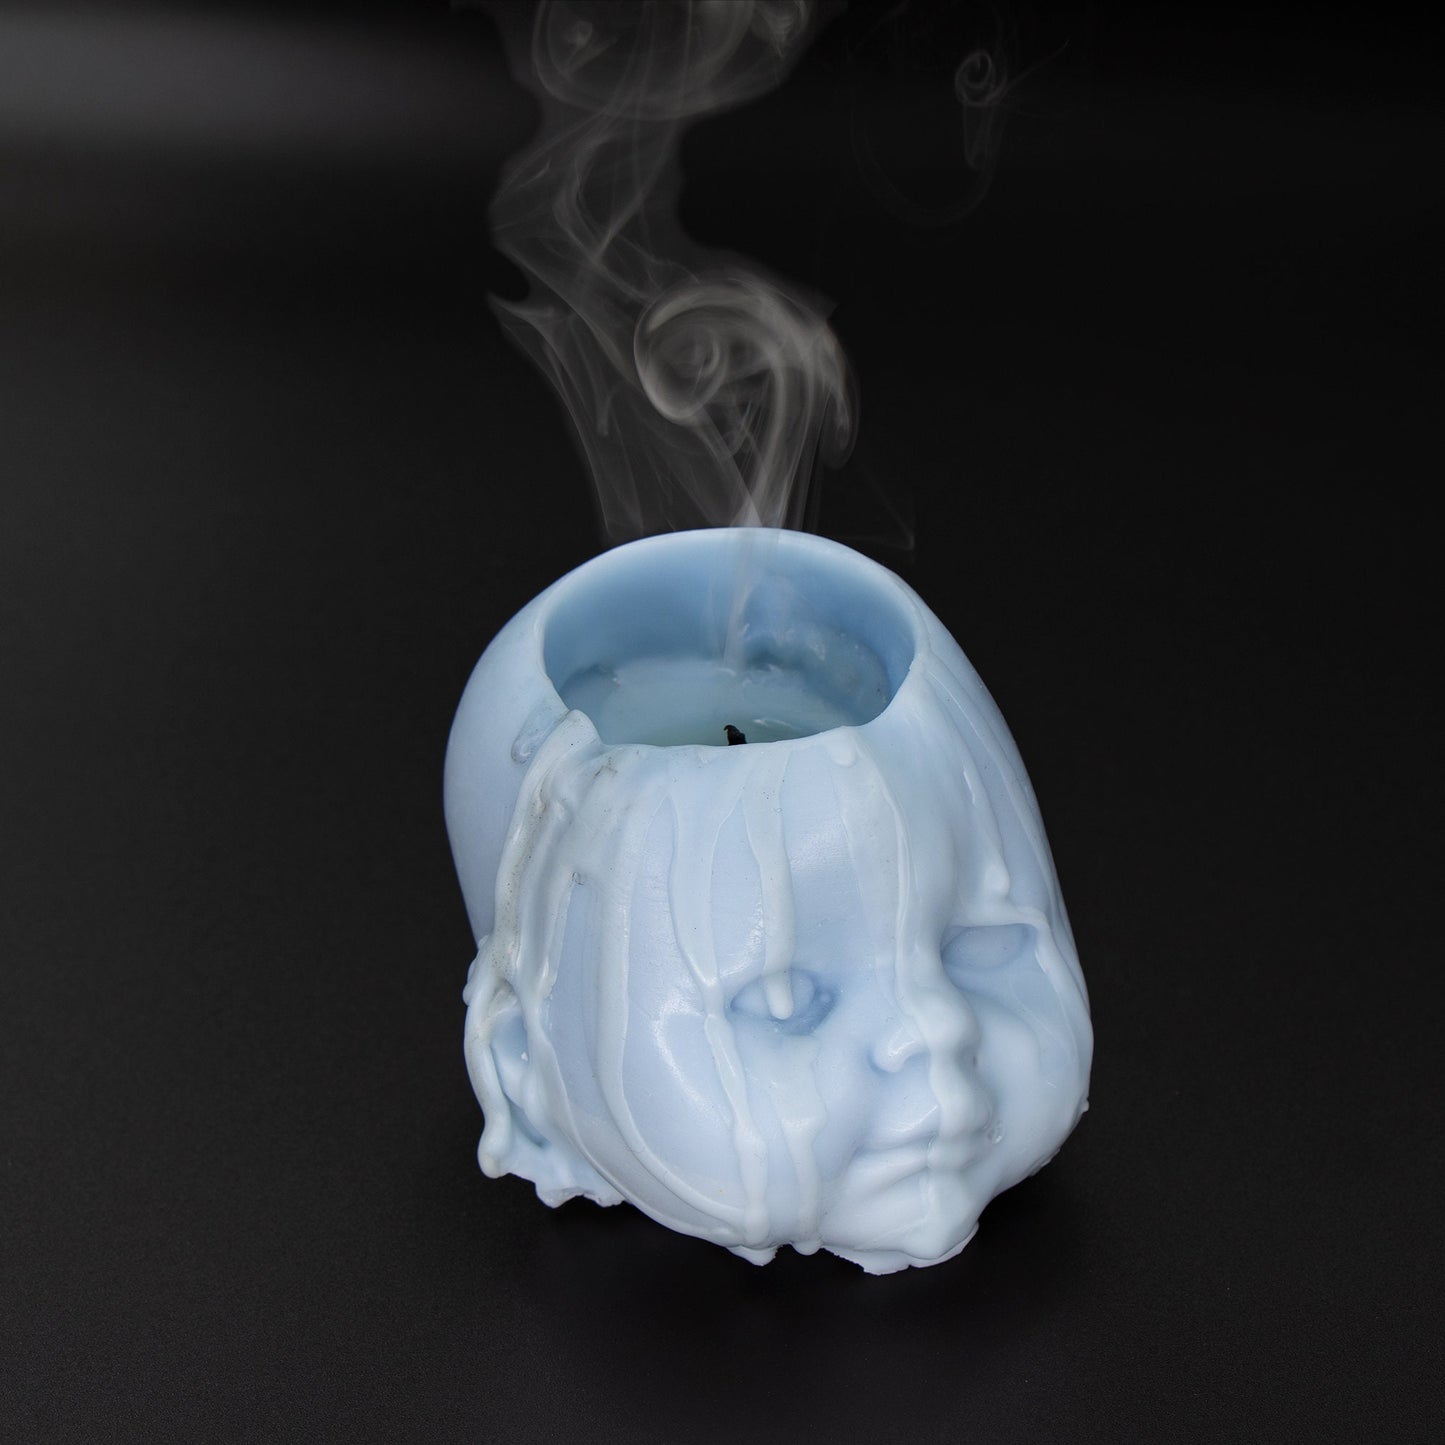 Baby head candle. Cute and Creepy.